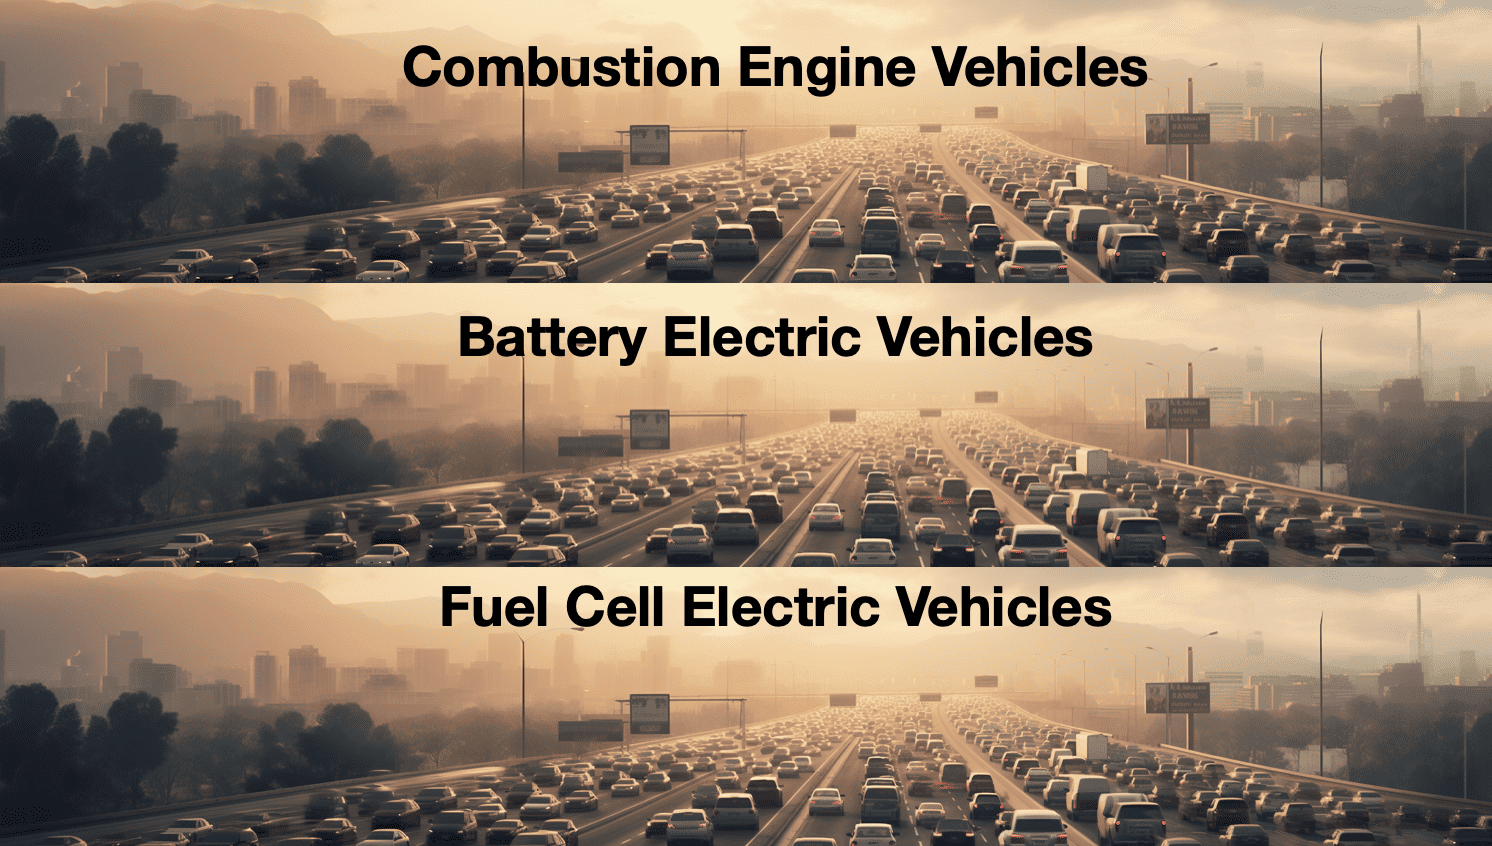 Conspiracy Theories & Co: Is a concerted media campaign against electromobility underway?